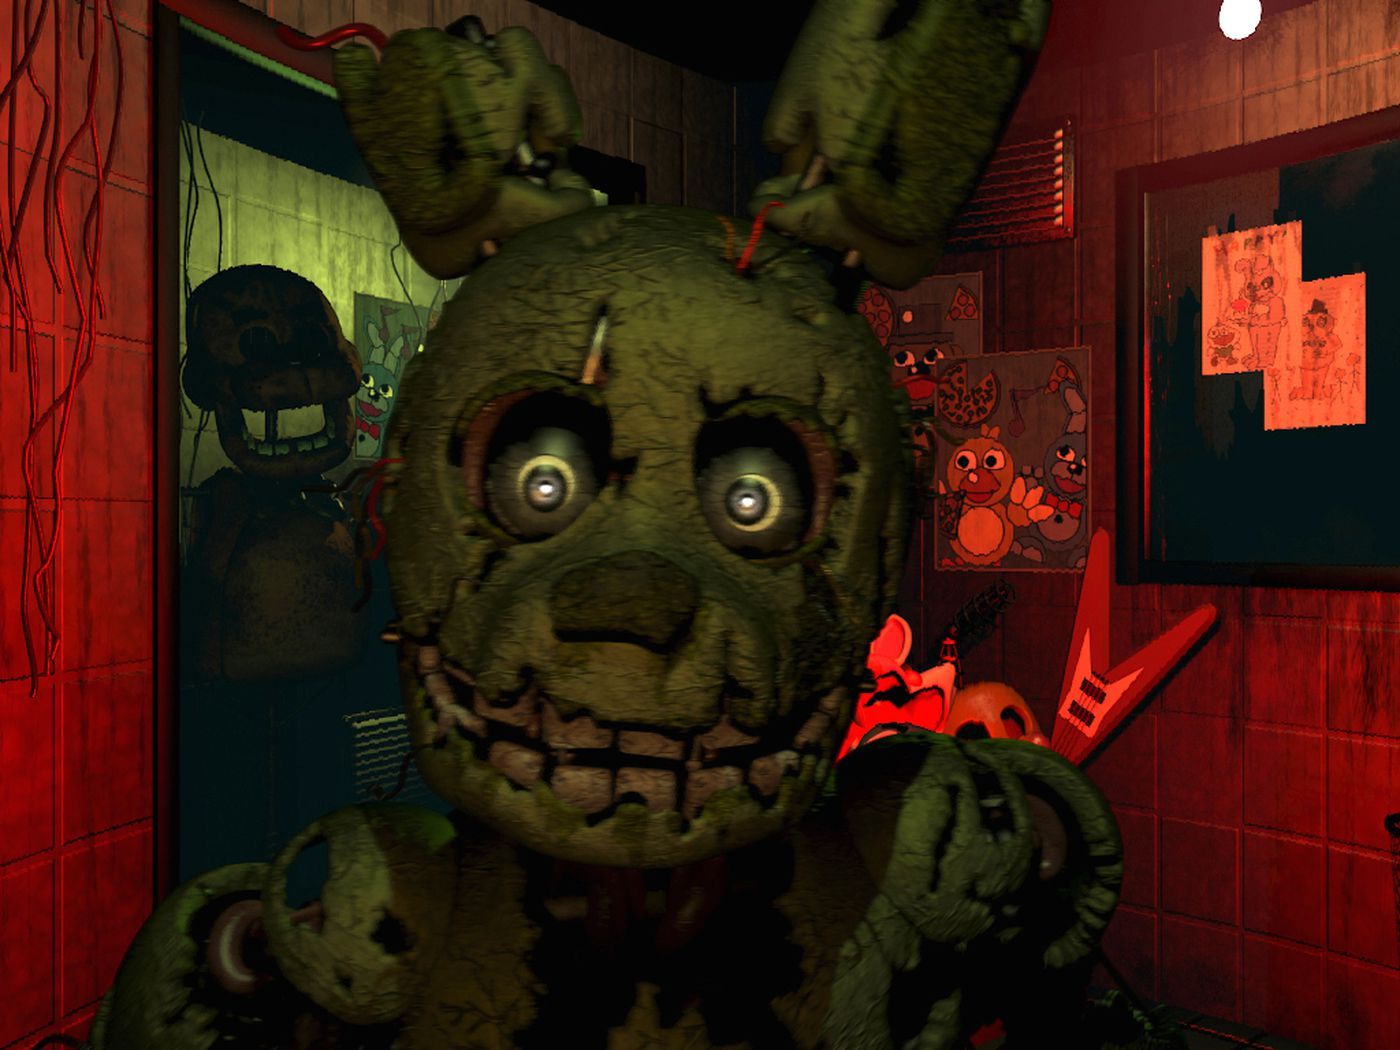 Five Nights at Freddy's movie delayed, new 'AAA' game in the works